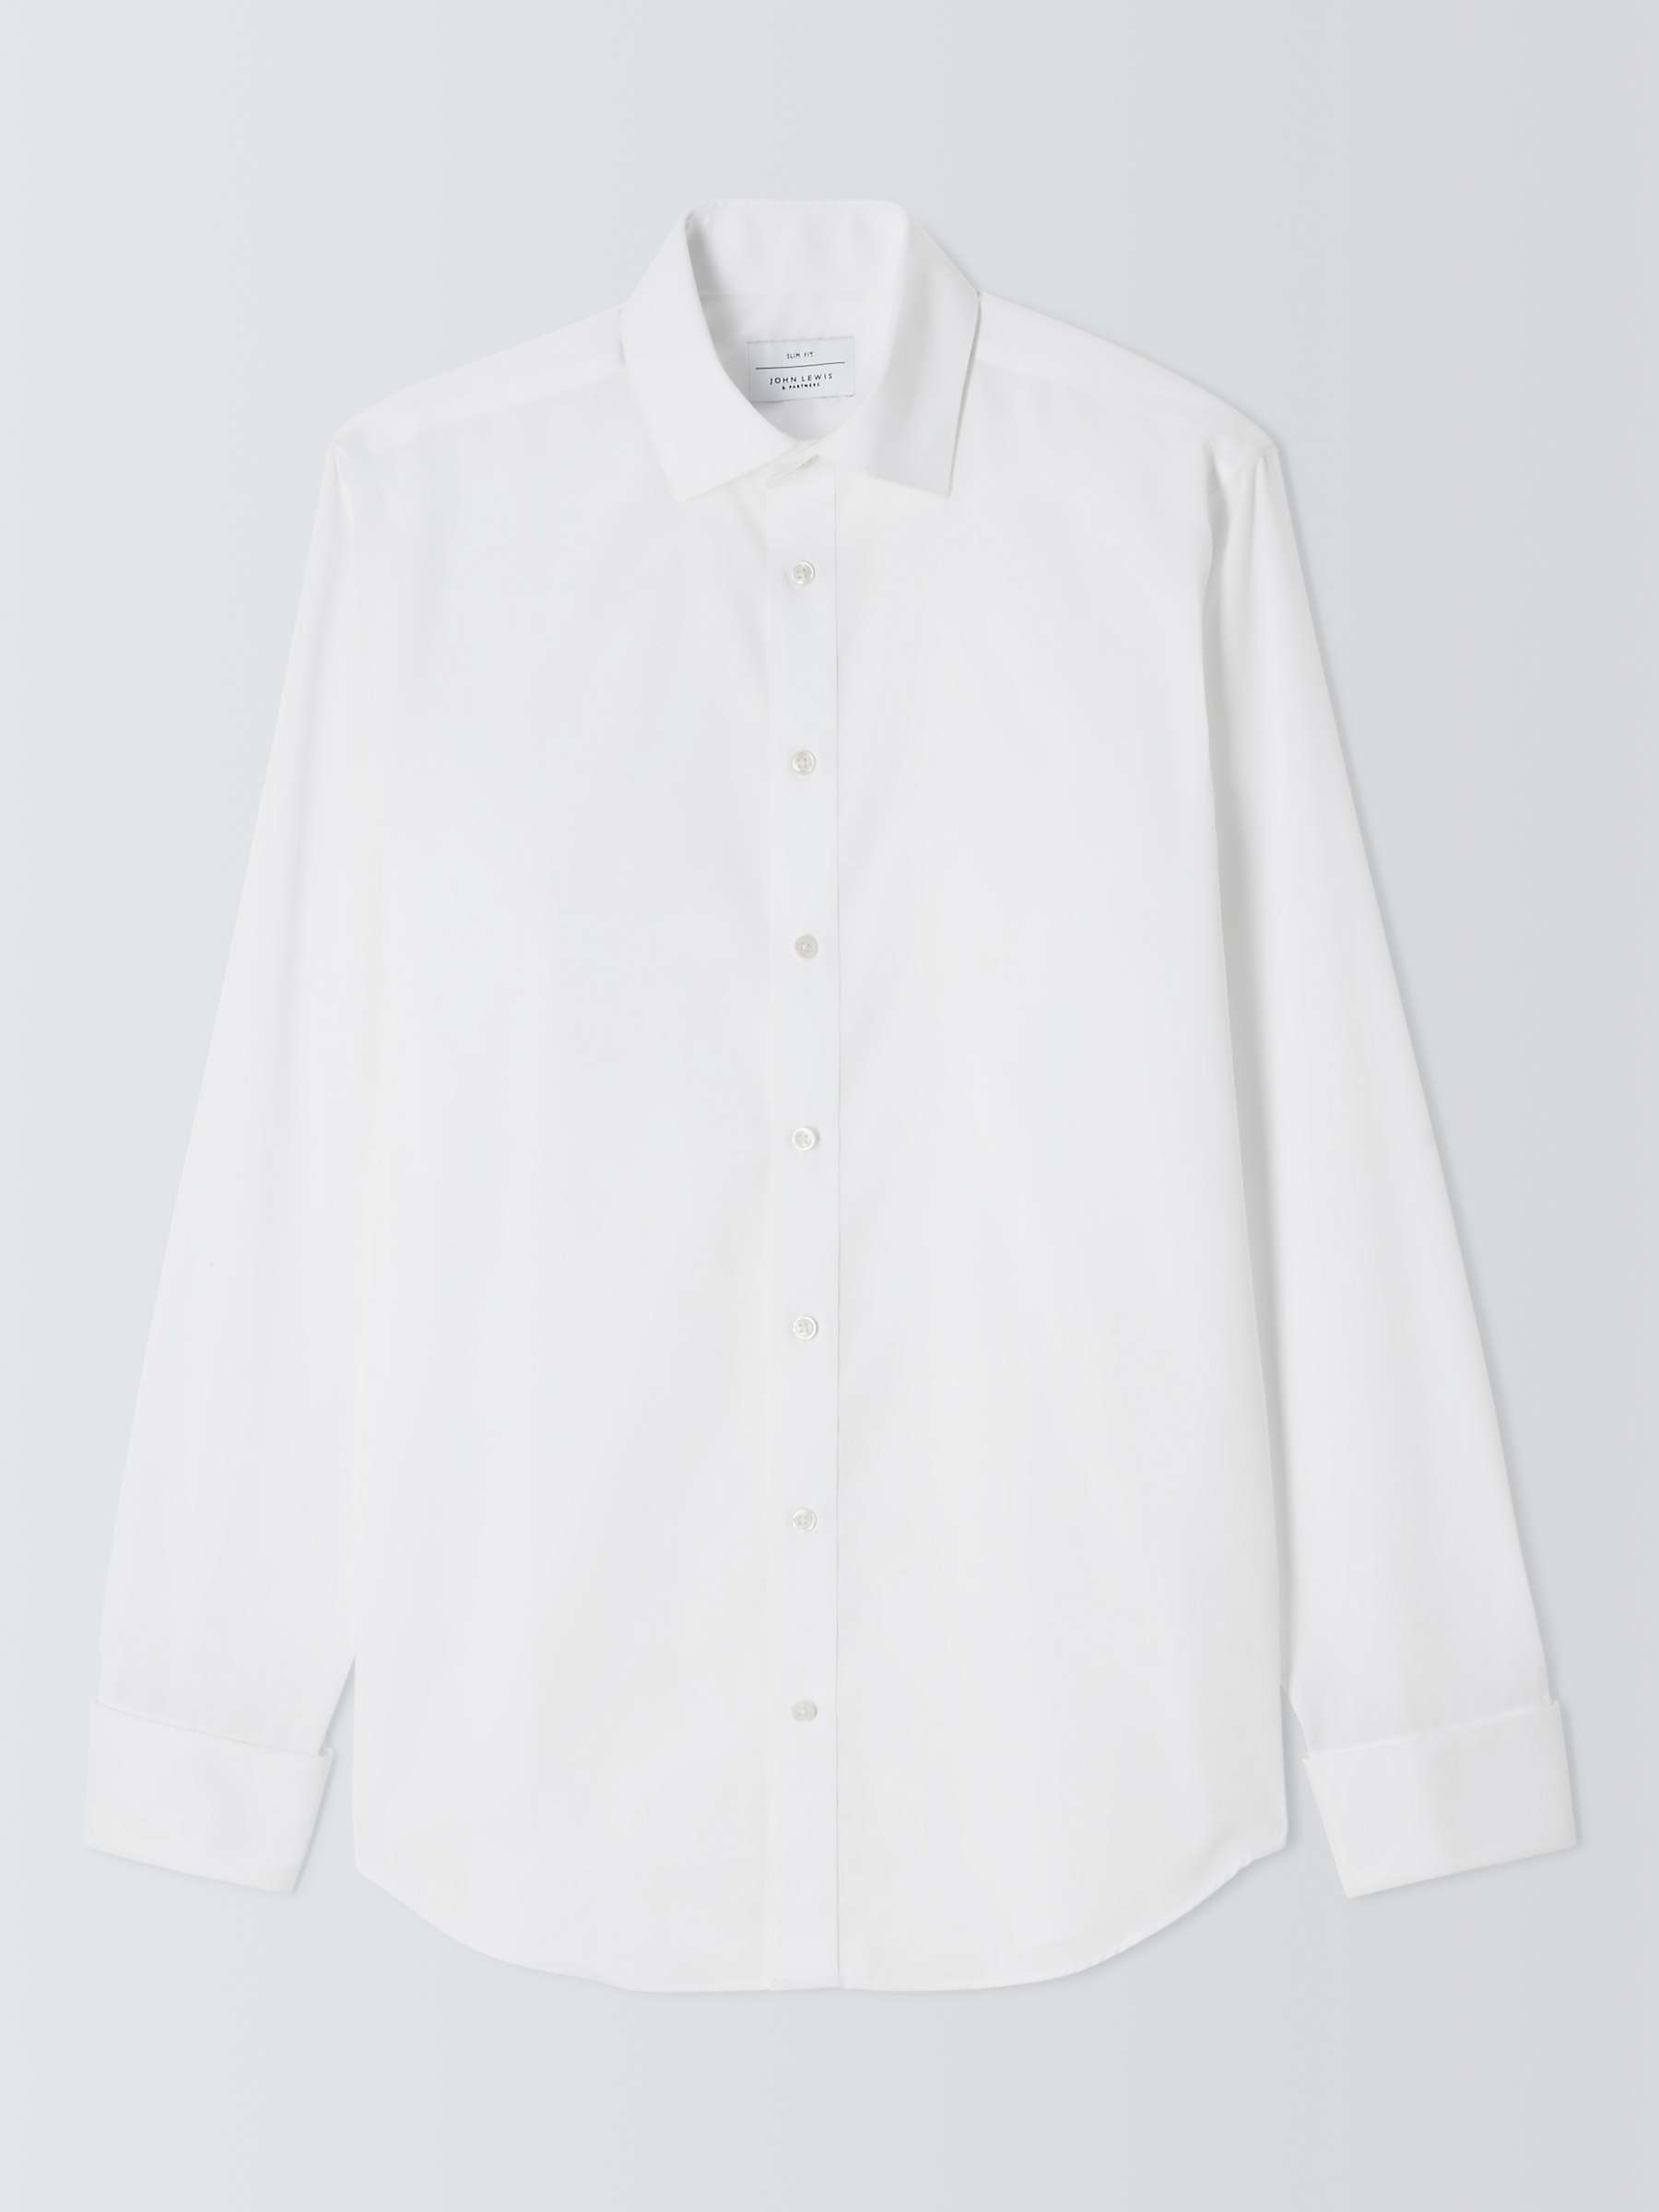 Buy John Lewis Non Iron Twill Double Cuff Slim Fit Shirt, White Online at johnlewis.com